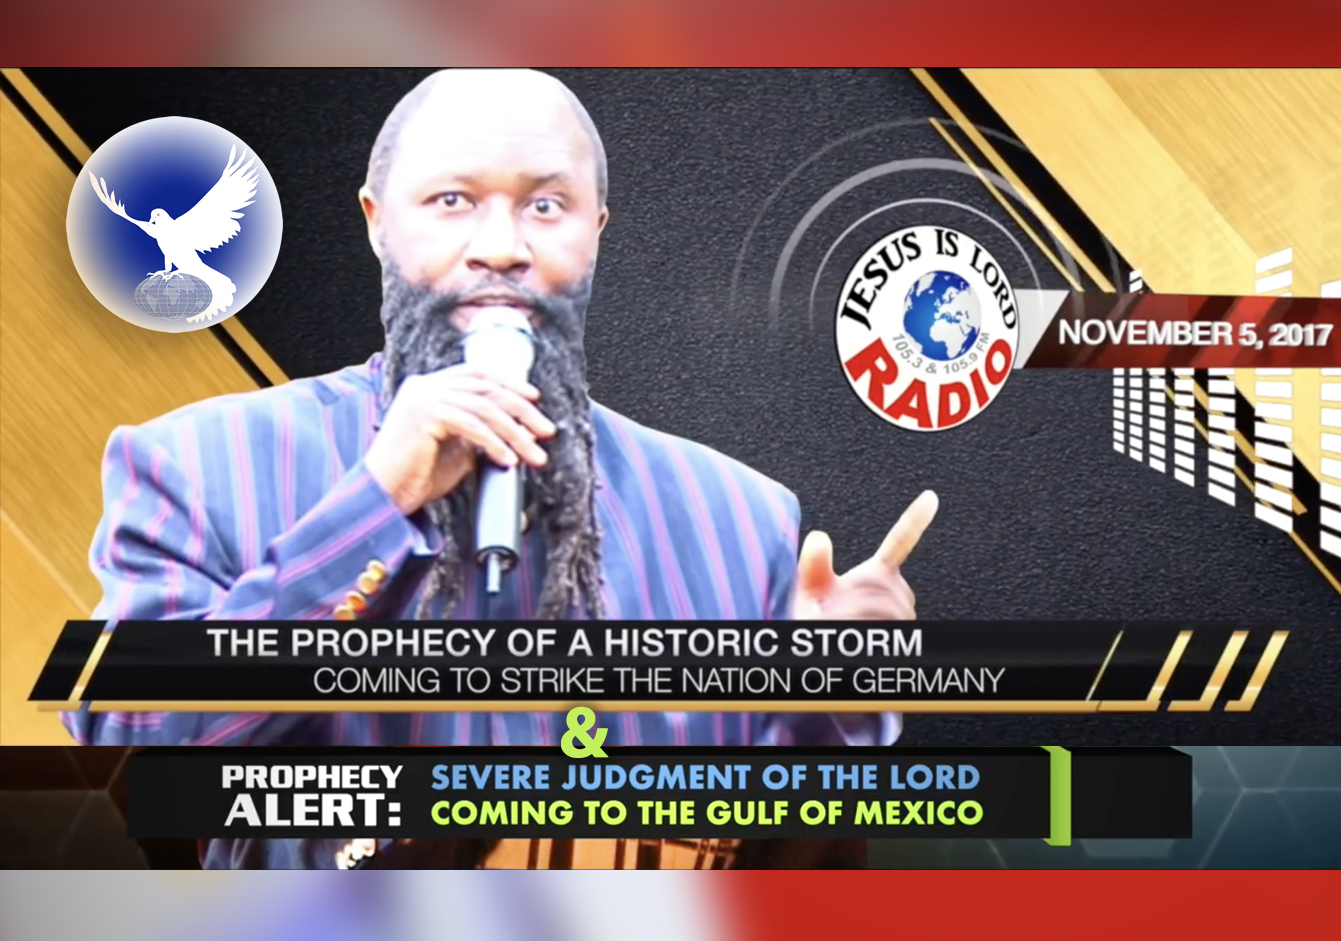 EPISODE 26 - THE PROPHECY OF A HISTORIC STORM COMING TO STRIKE THE NATION OF GERMANY & A SEVERE JUDGMENT OF THE LORD COMING TO THE GULF OF MEXICO (05Nov2017) - PROPHET DR. OWUOR